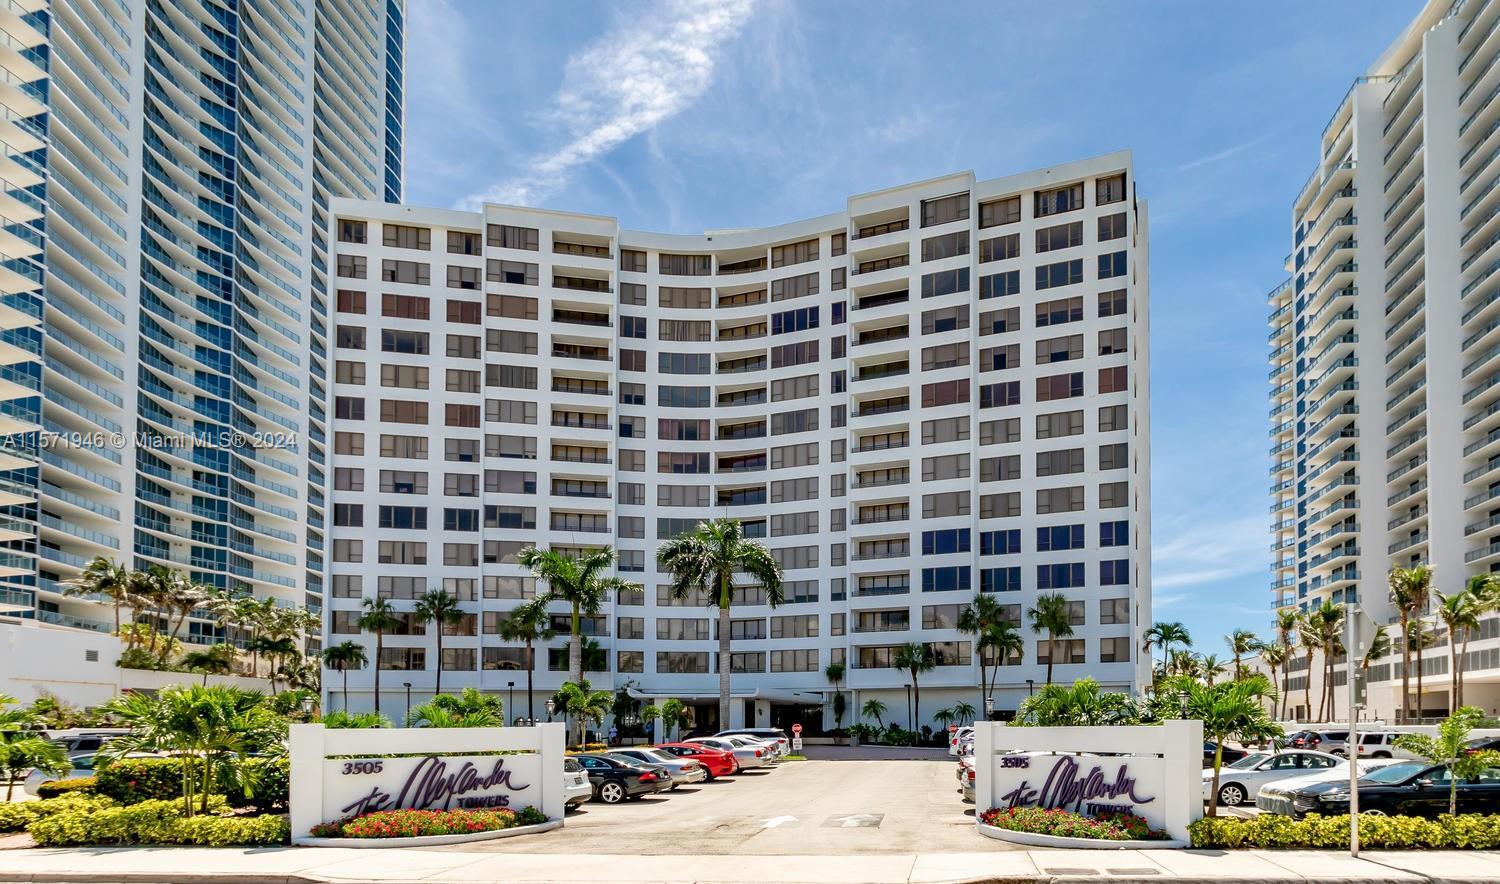 Photo of 3505 S Ocean Dr #305 in Hollywood, FL